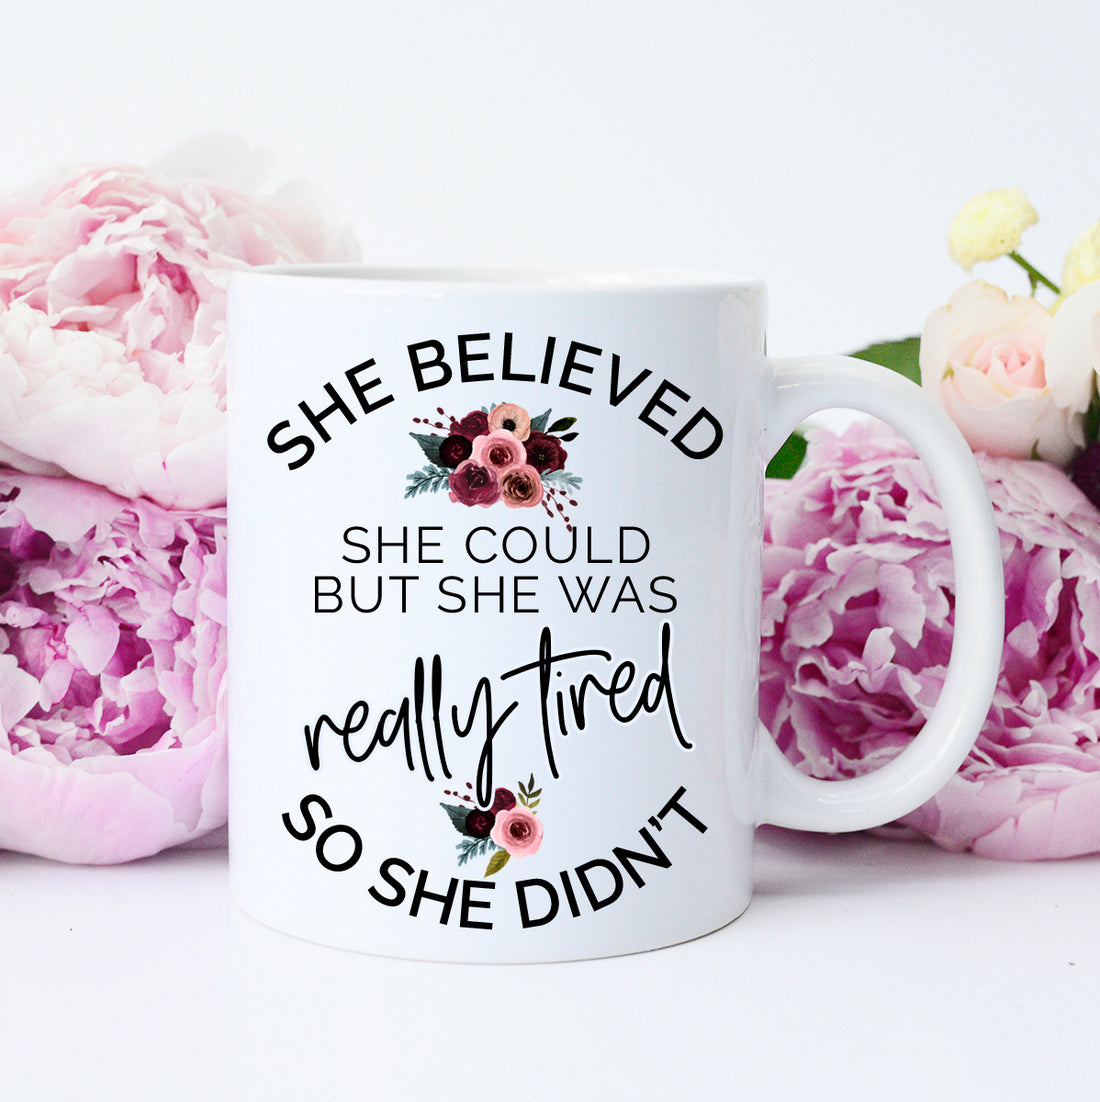 She Believed She Could But she was REALLY tired so she Didn&